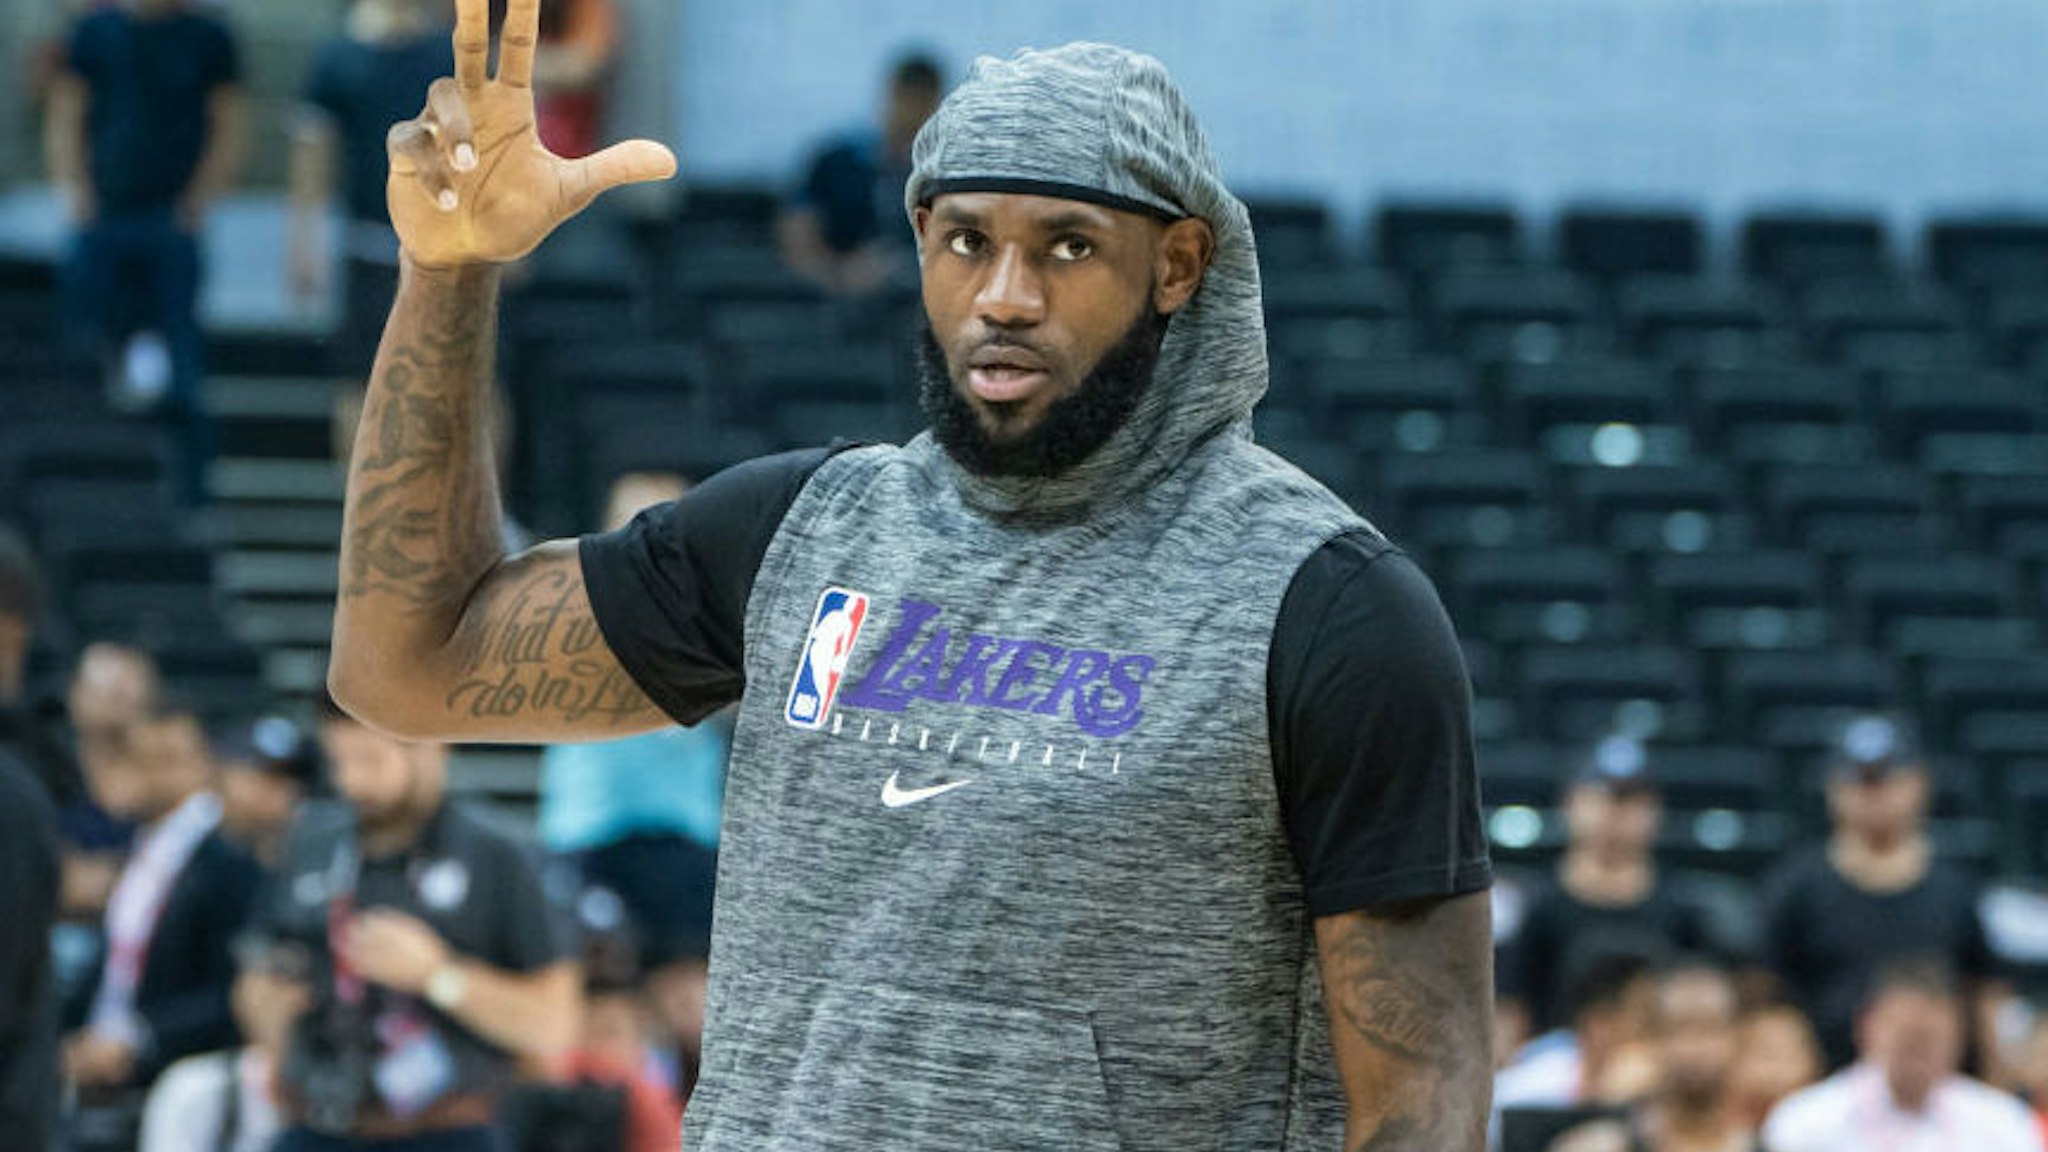 SHENZHEN, CHINA - OCTOBER 12: LeBorn James of Los Angeles Lakers reacts during Los Angeles Lakers v Brooklyn Nets at Shenzhen Universiade Center on October 12, 2019 in Shenzhen, China. NOTE TO USER: User expressly acknowledges and agrees that, by downloading and/or using this photograph, user is consenting to the terms and conditions of the Getty Images License Agreement.